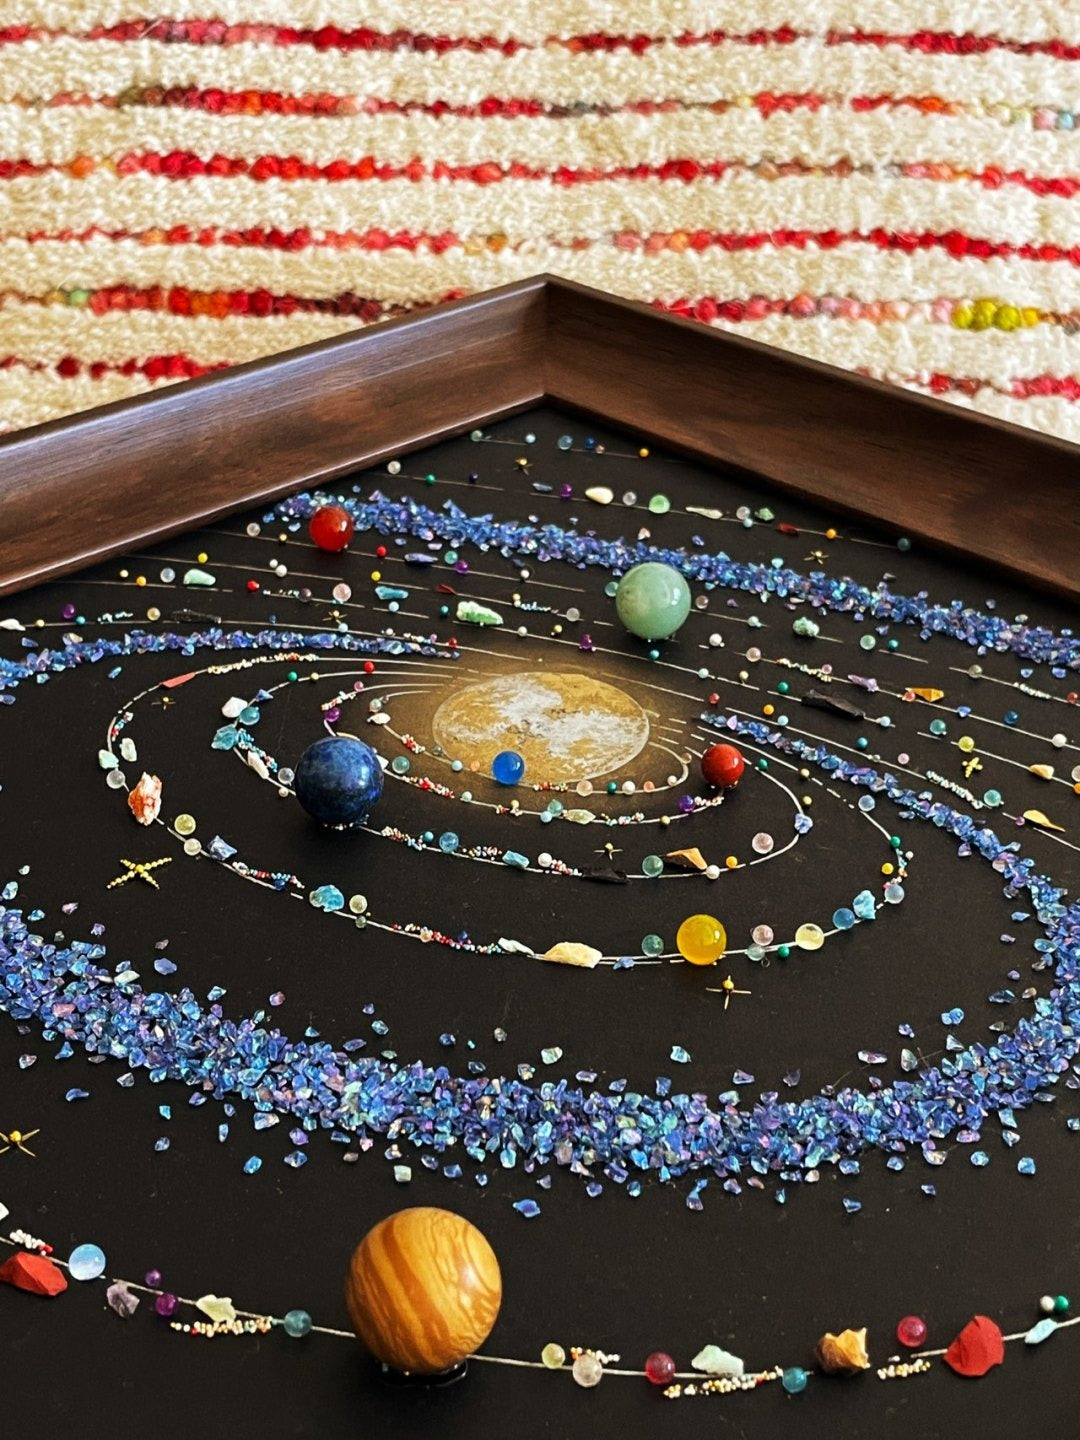 Create your own starry sky painting - Decorative painting of the solar system universe specimen